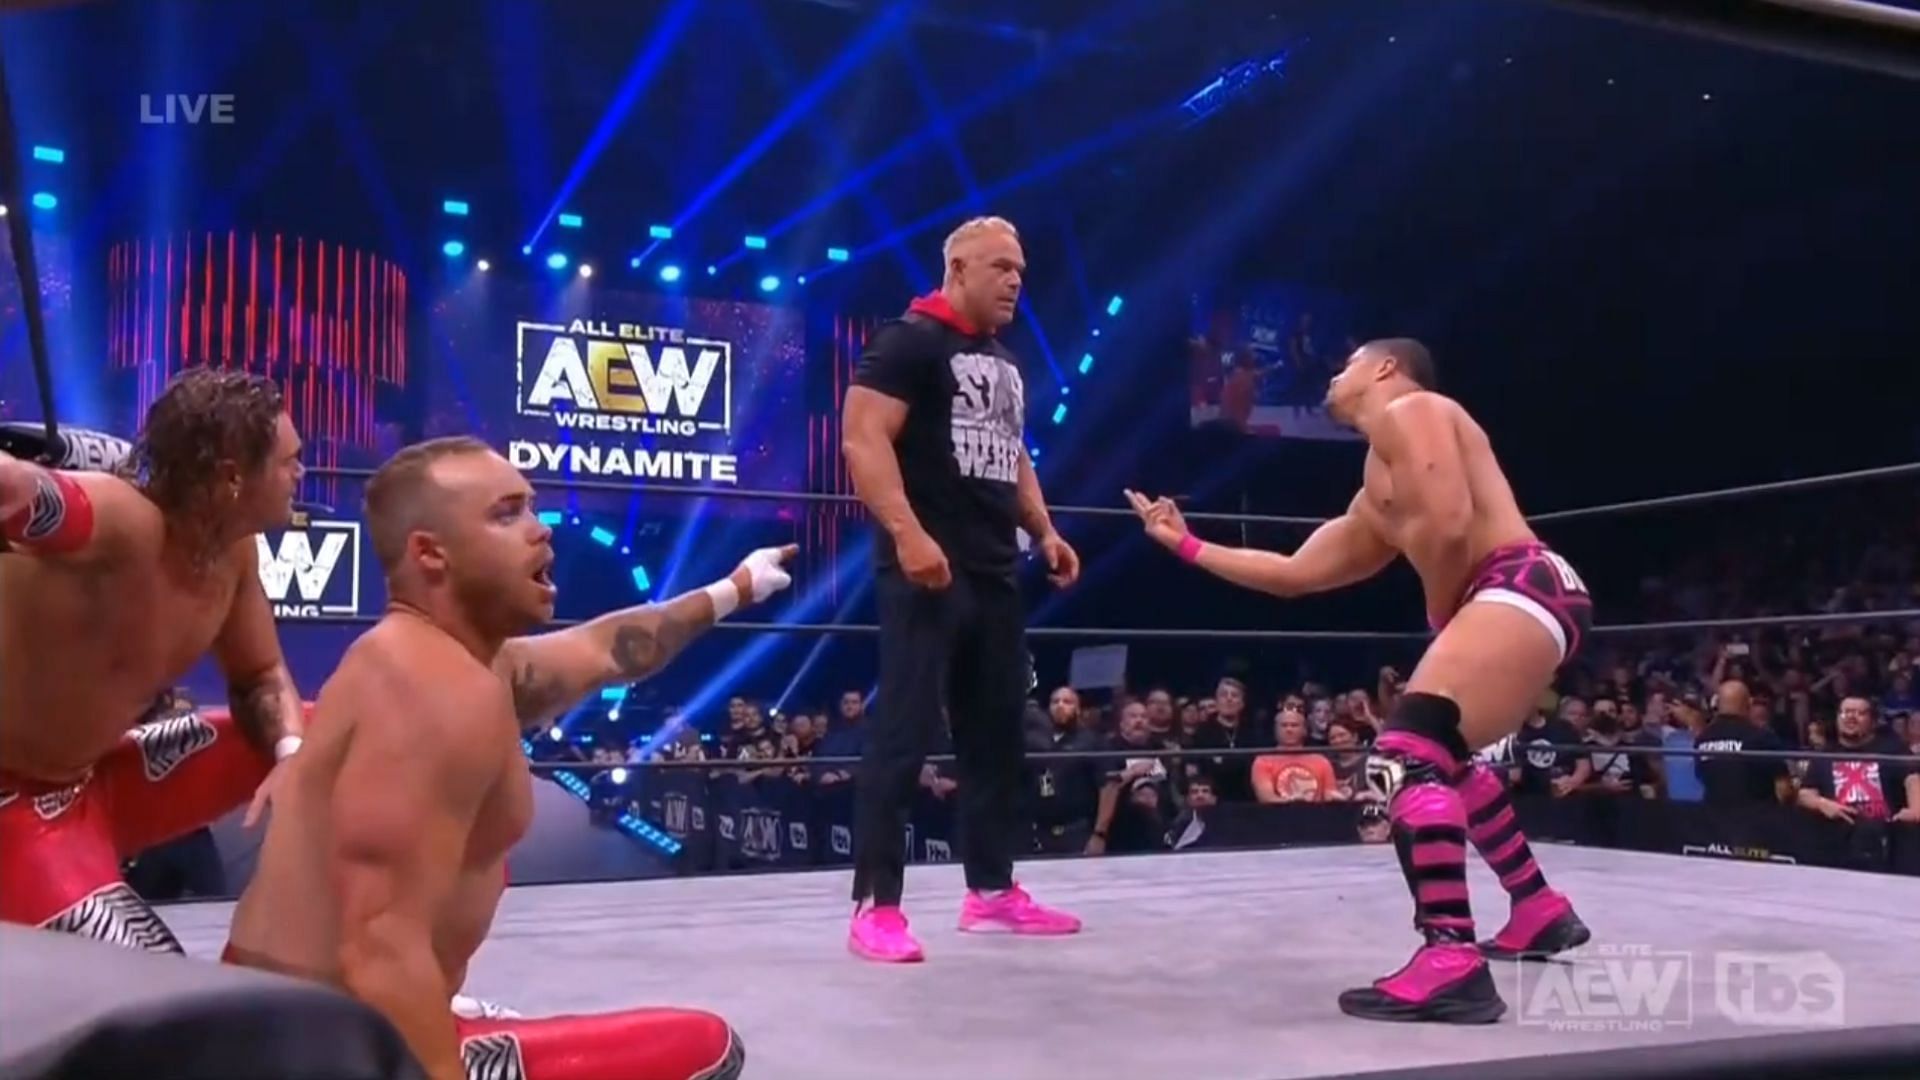 Billy Gunn did the unexpected on AEW Dynamite this week!